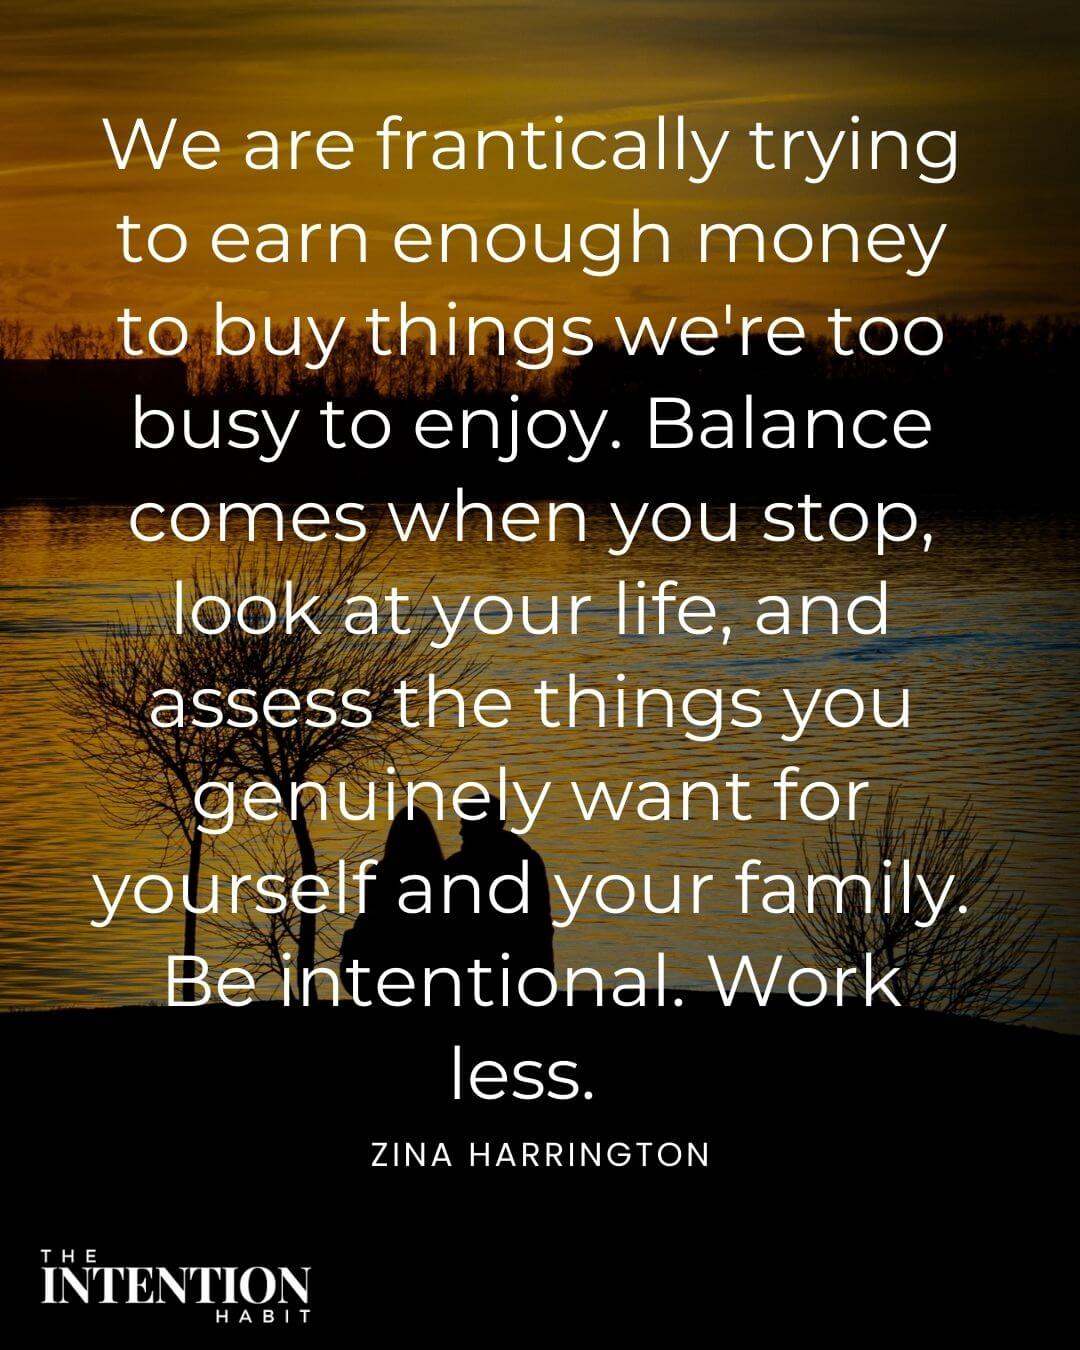 Intentional living quote - we are frantically trying to earn enough money to buy things we're too busy to enjoy. Balance comes when you stop, look at your life and access the things you genuinely want for yourself and your family the intentional work less.